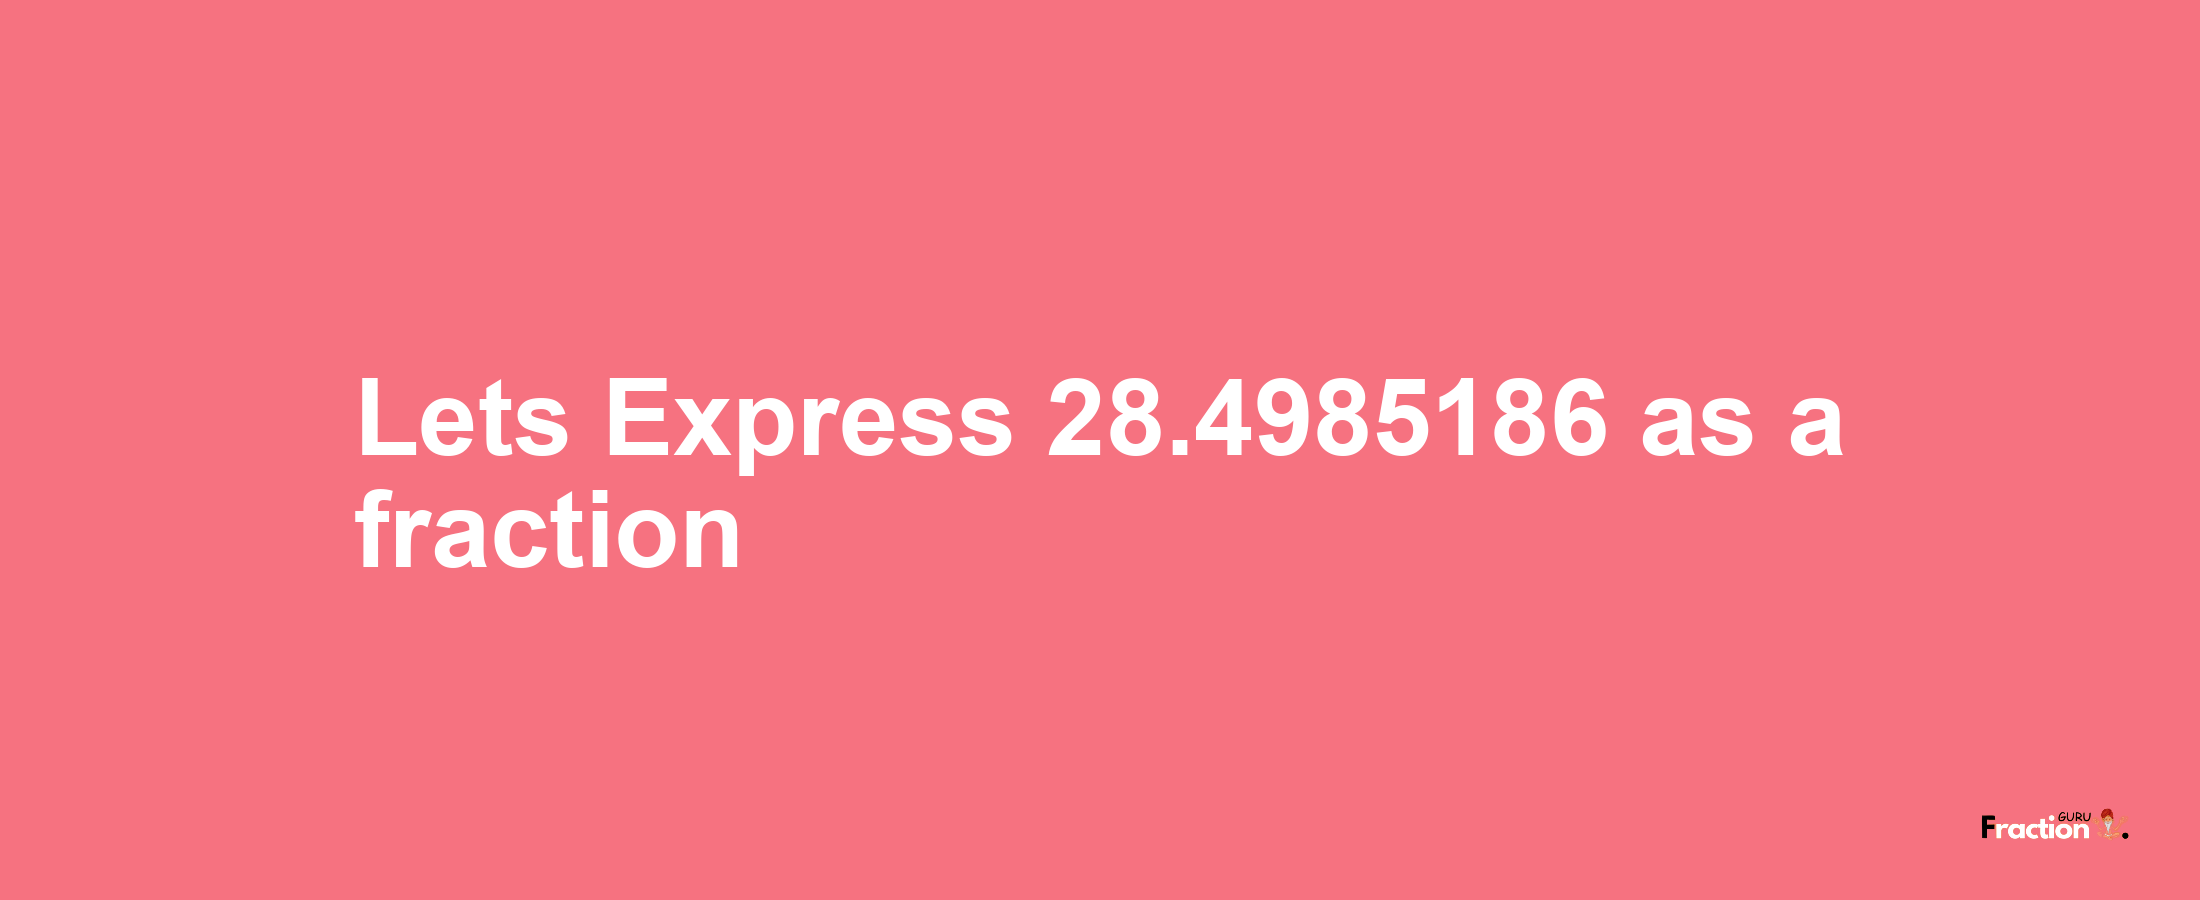 Lets Express 28.4985186 as afraction